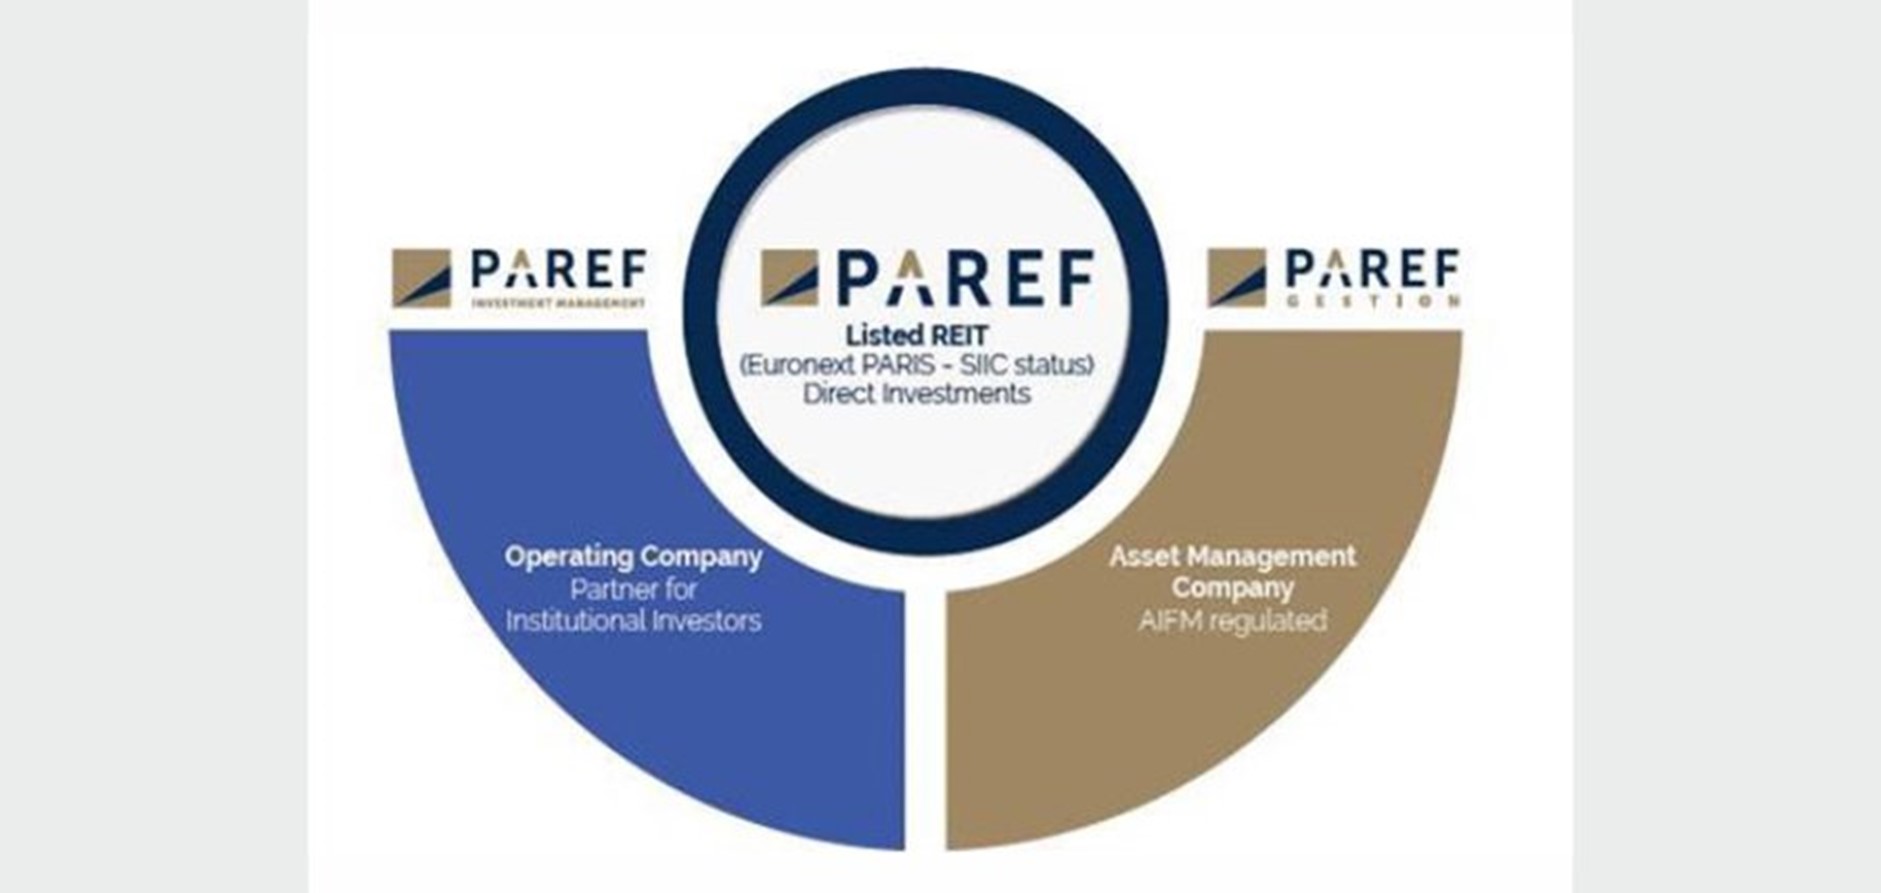 PAREF Group: Your One-stop Solution for all Real Estate Investment Solutions